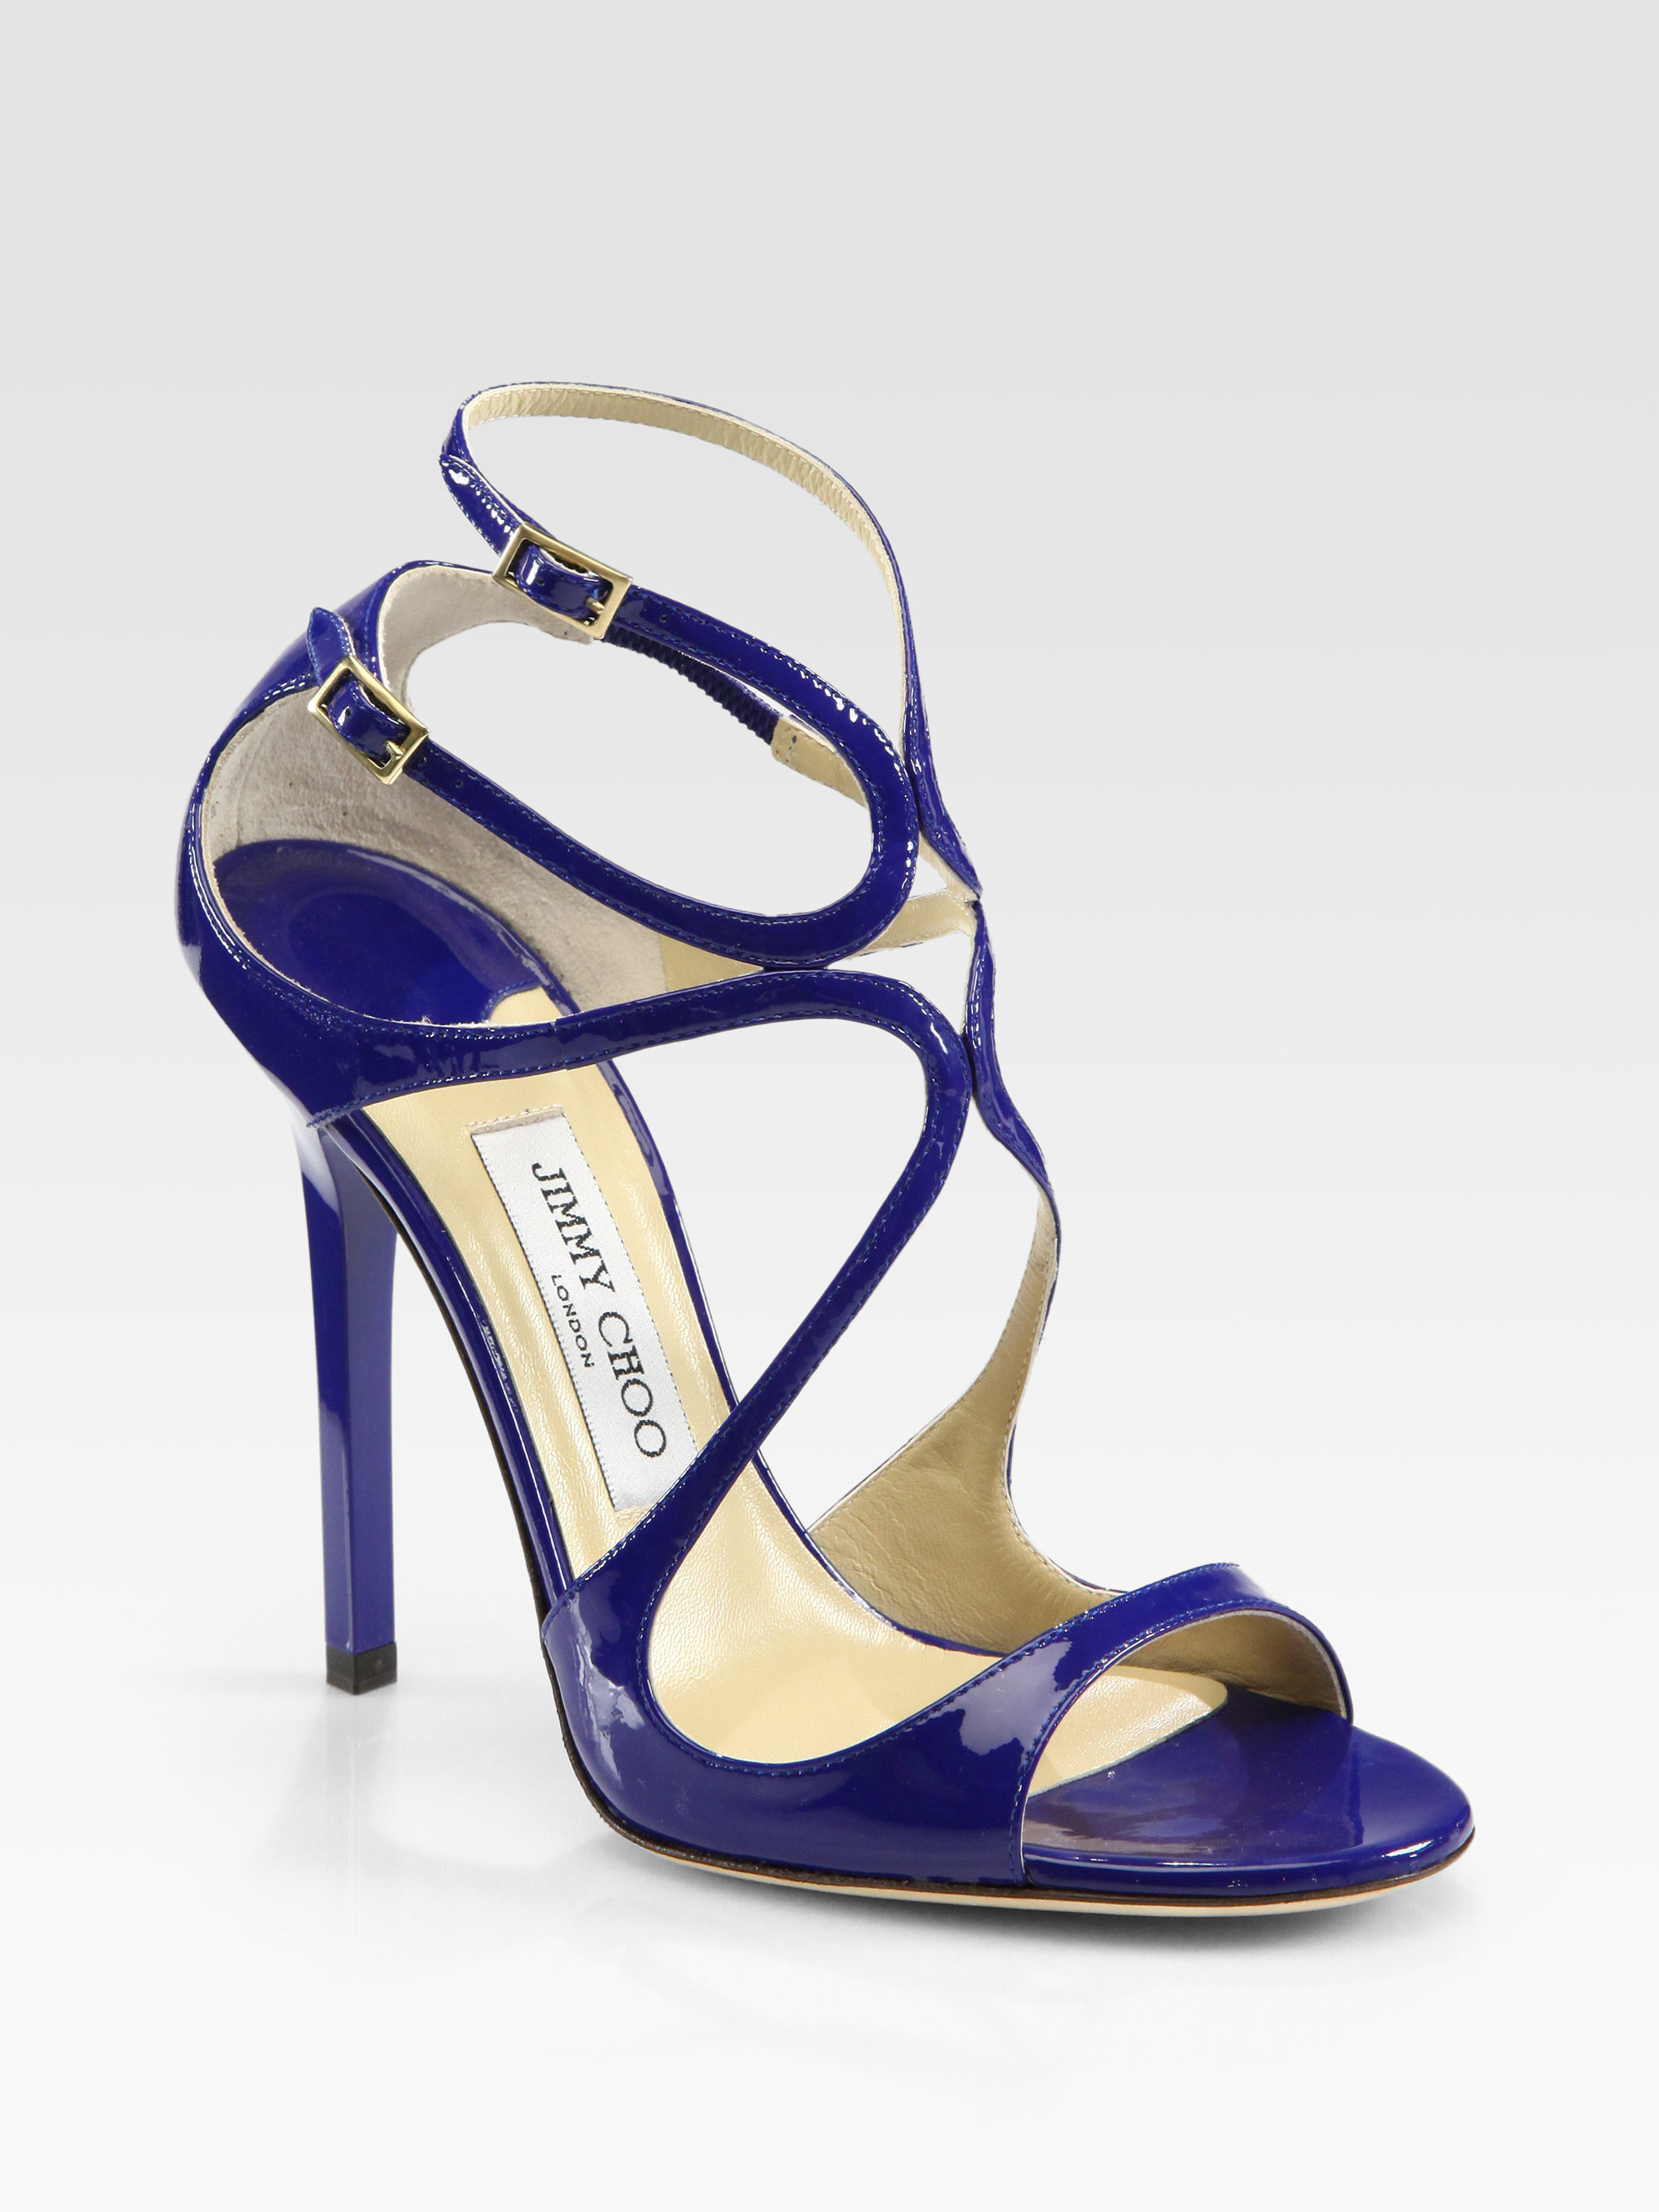 Lyst - Jimmy choo Lance Strappy Patent Leather Sandals in Blue